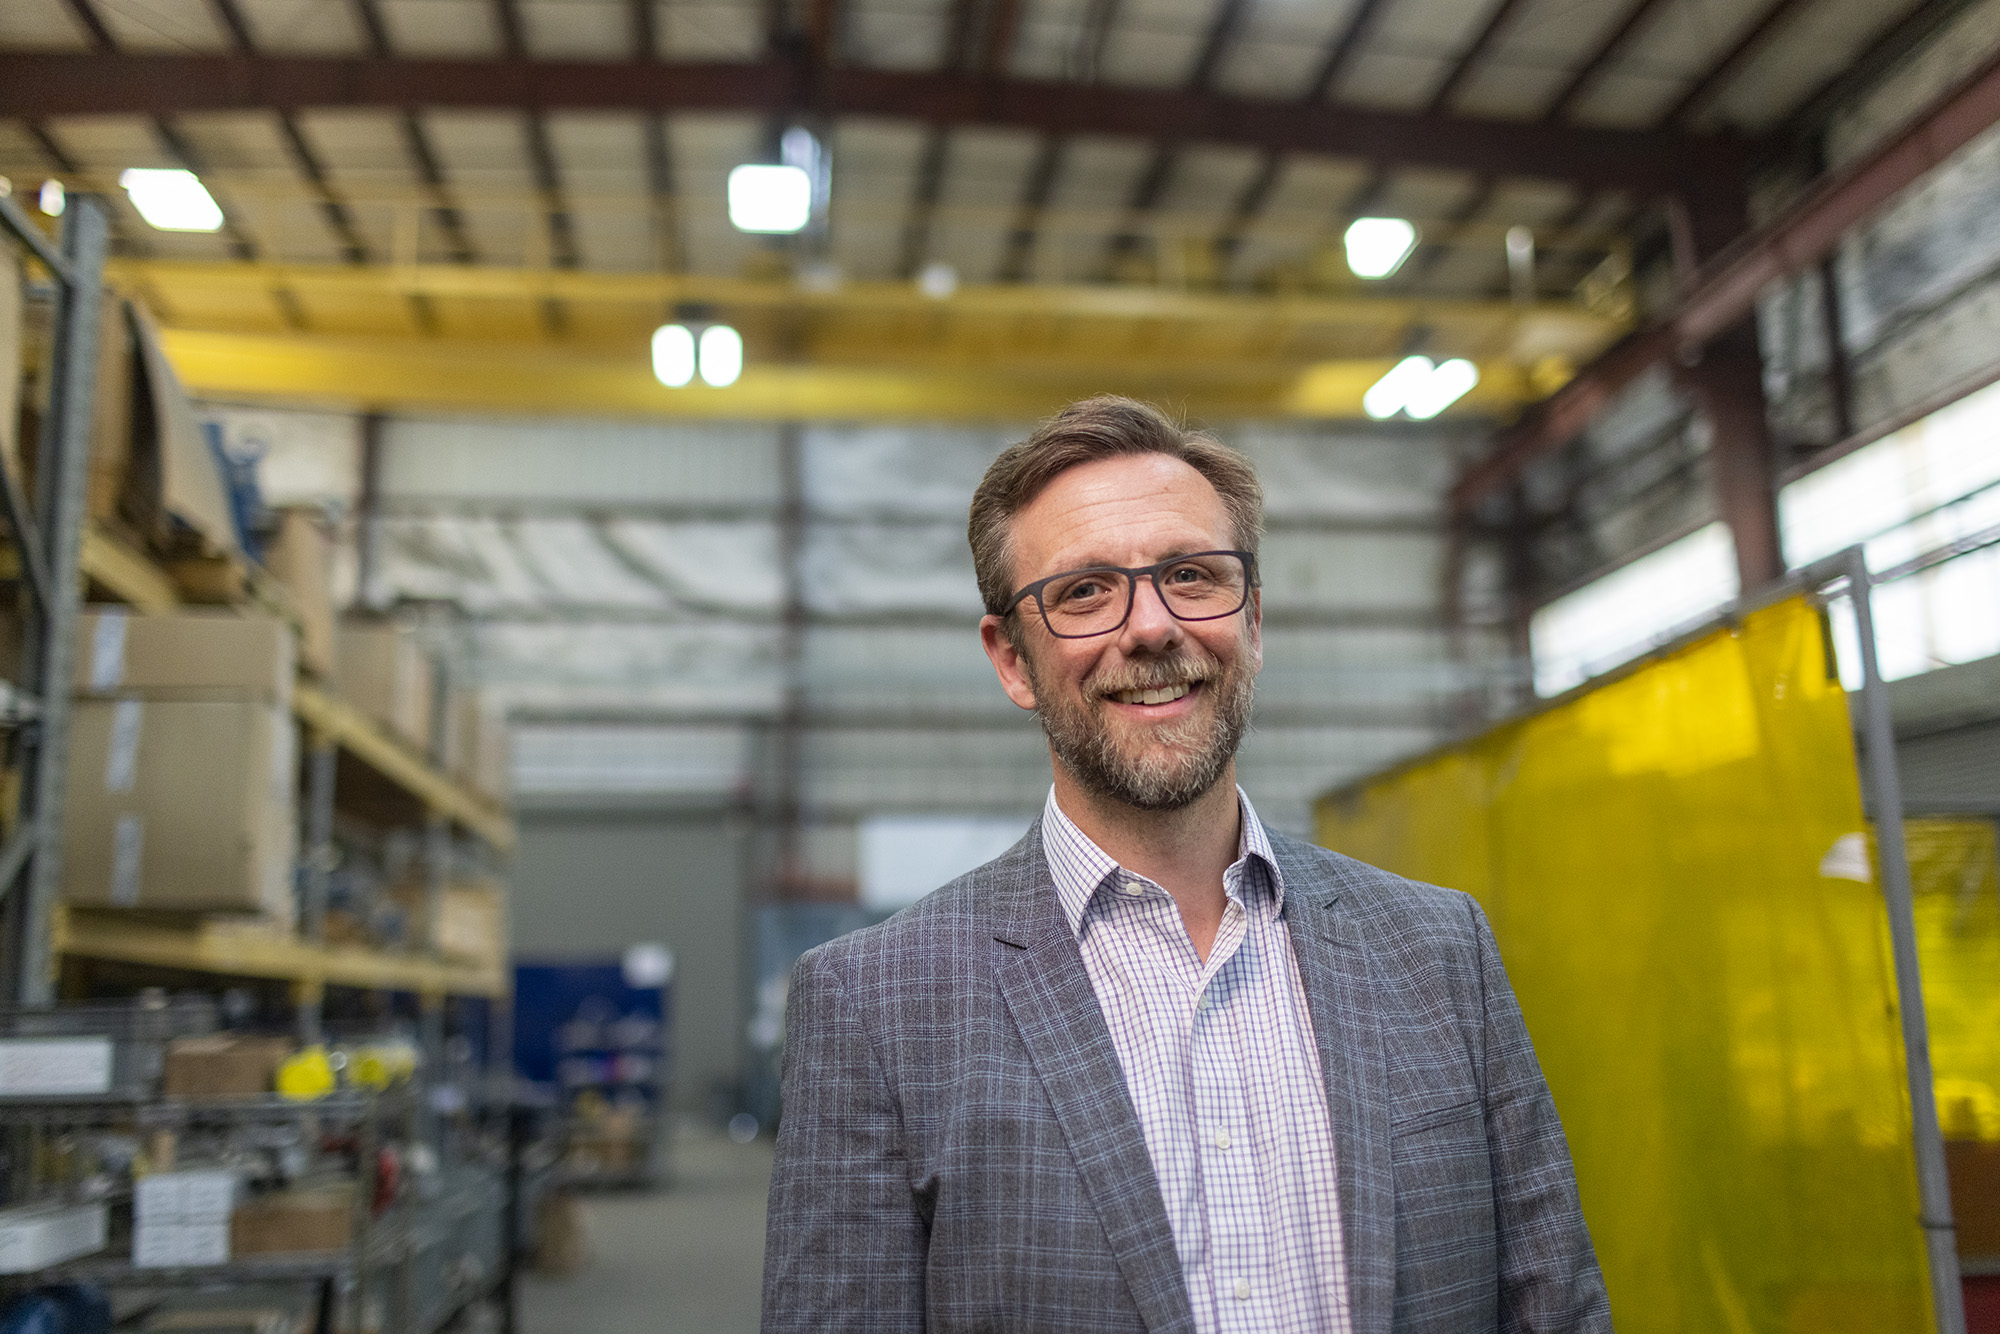 CEO, Daniel Voit posing for photo in Blentech manufacturing warehouse.